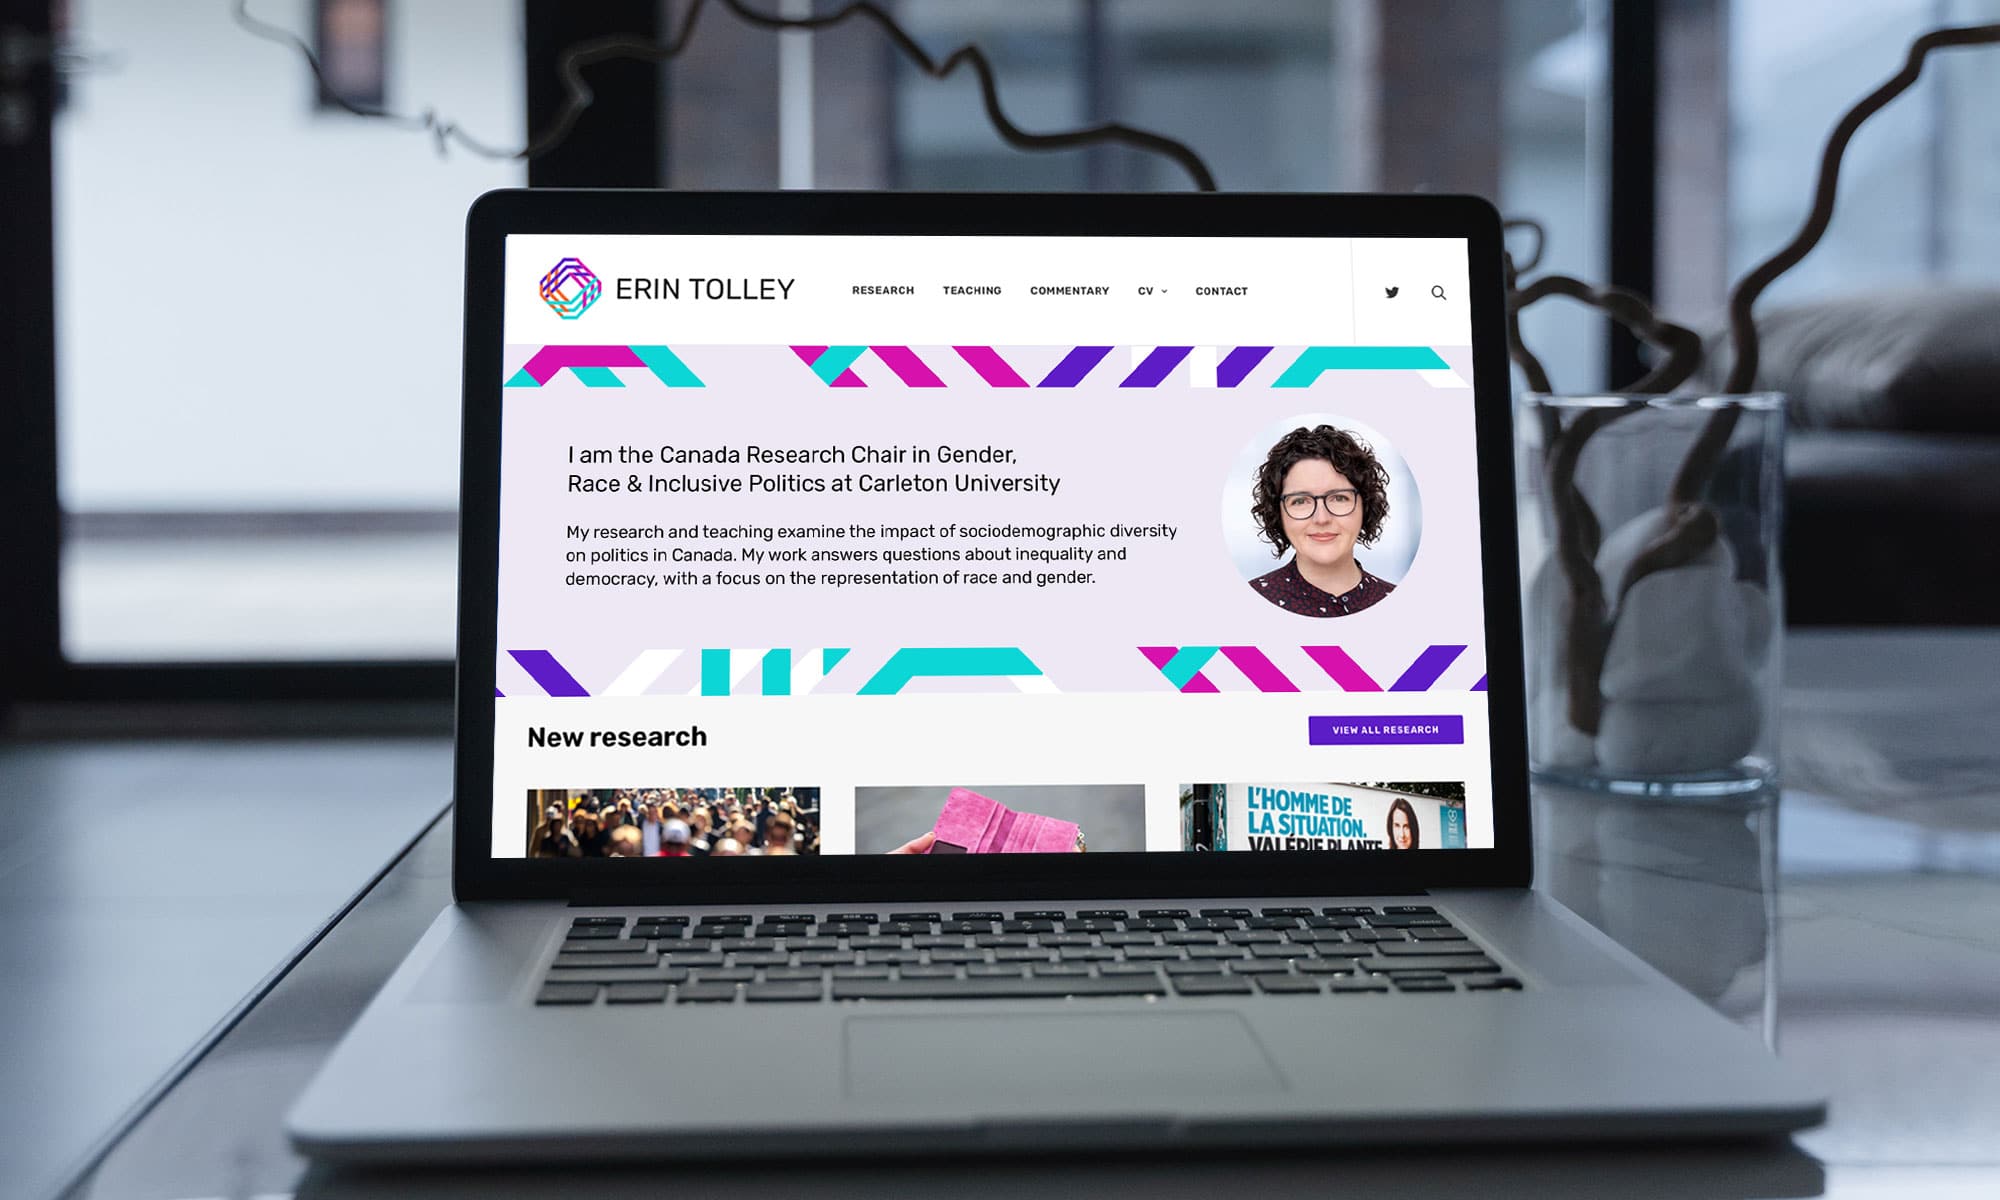 erin-tolley-research-chair-website-design-academic